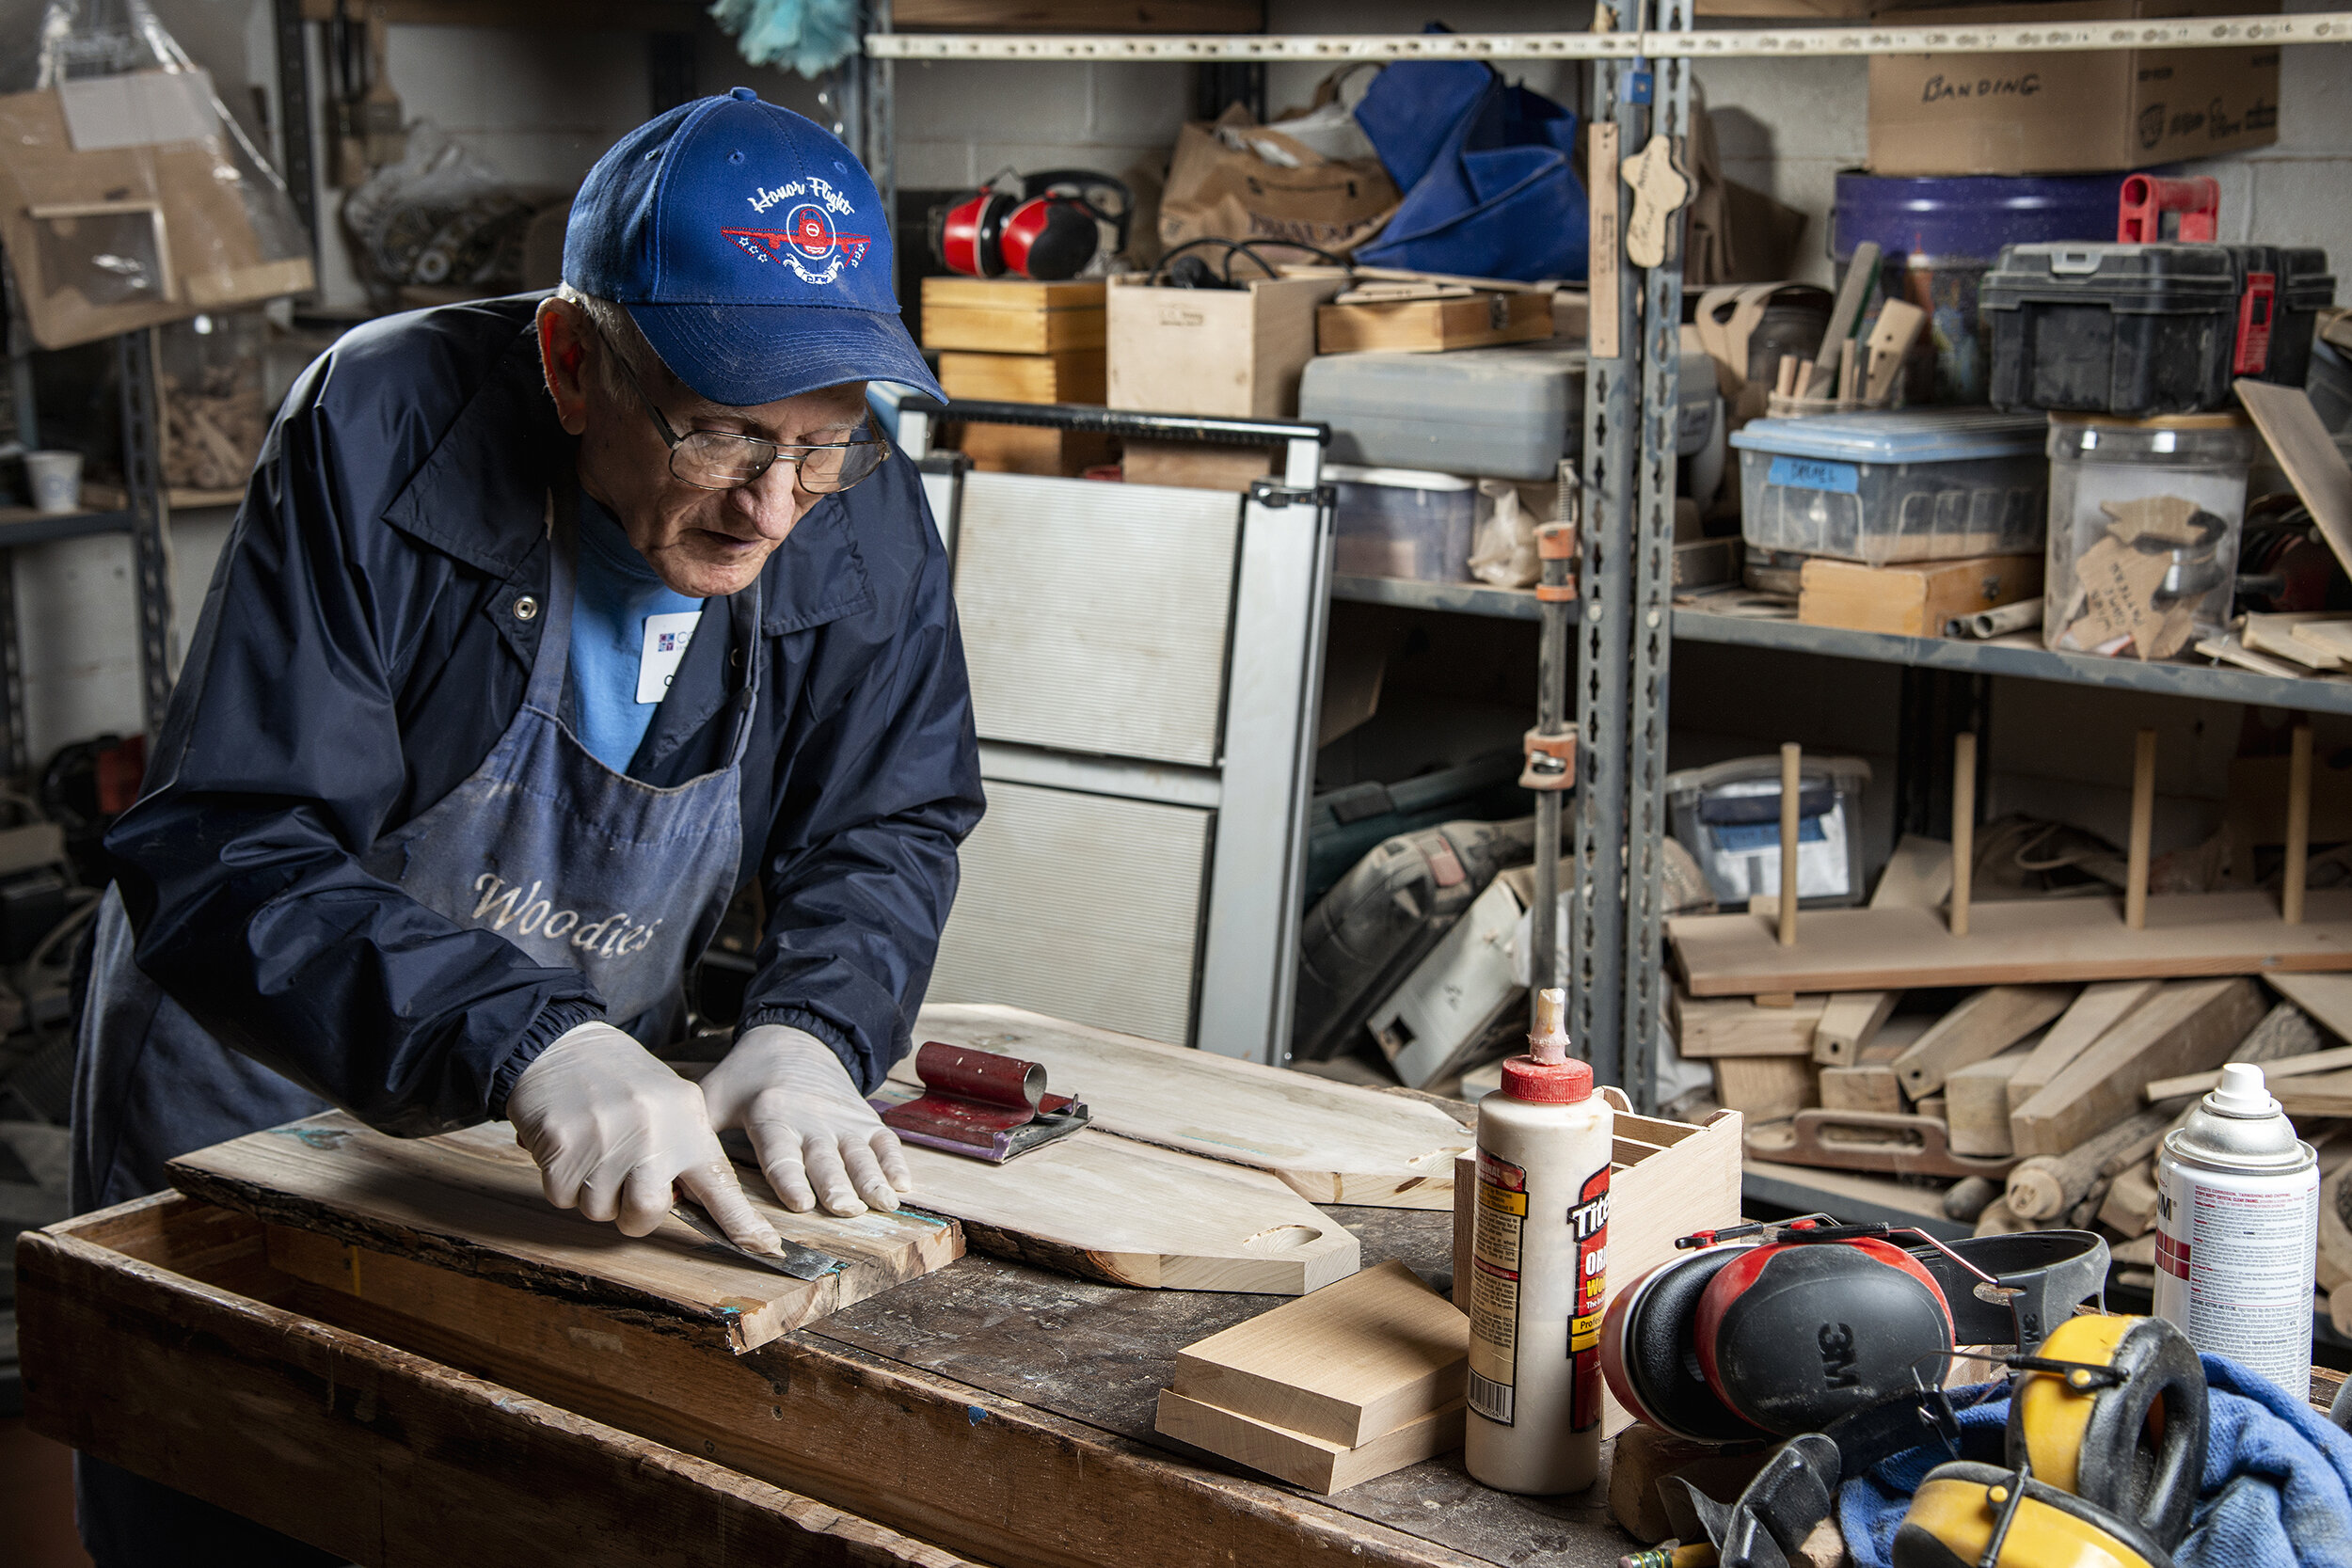  Fred Christen works in the woodshop at CC Young Senior Living center in Dallas, TX.  Christen, a frugal 89-year-old, helped organize the Woodies, a collective of senior woodworkers who, in addition to making hand-crafted goods, repaired residents’ f